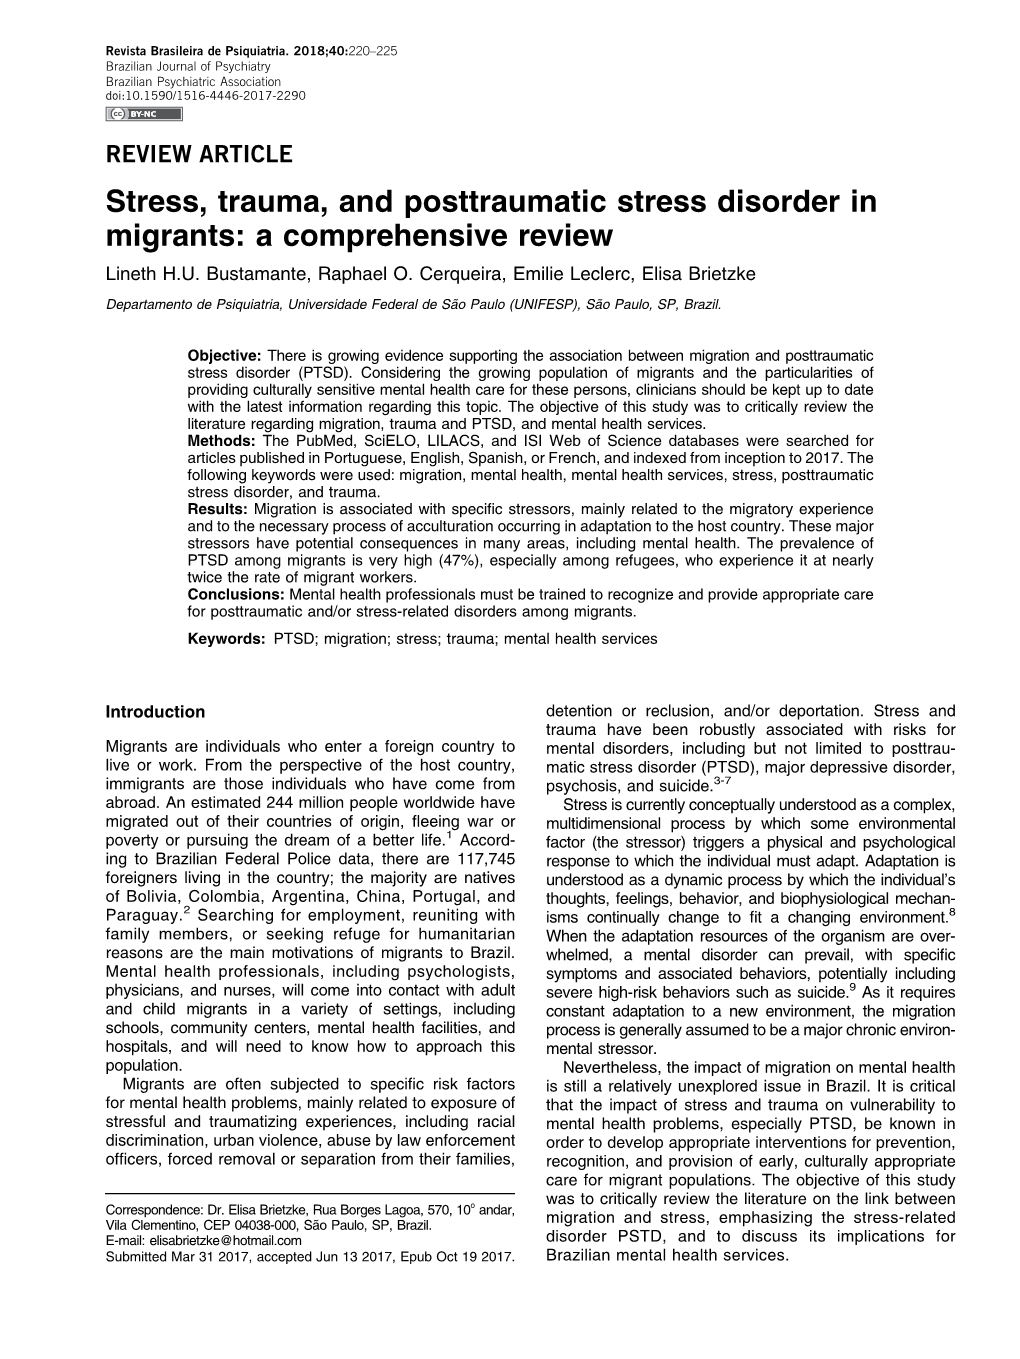 Stress, Trauma, and Posttraumatic Stress Disorder in Migrants: a Comprehensive Review Lineth H.U